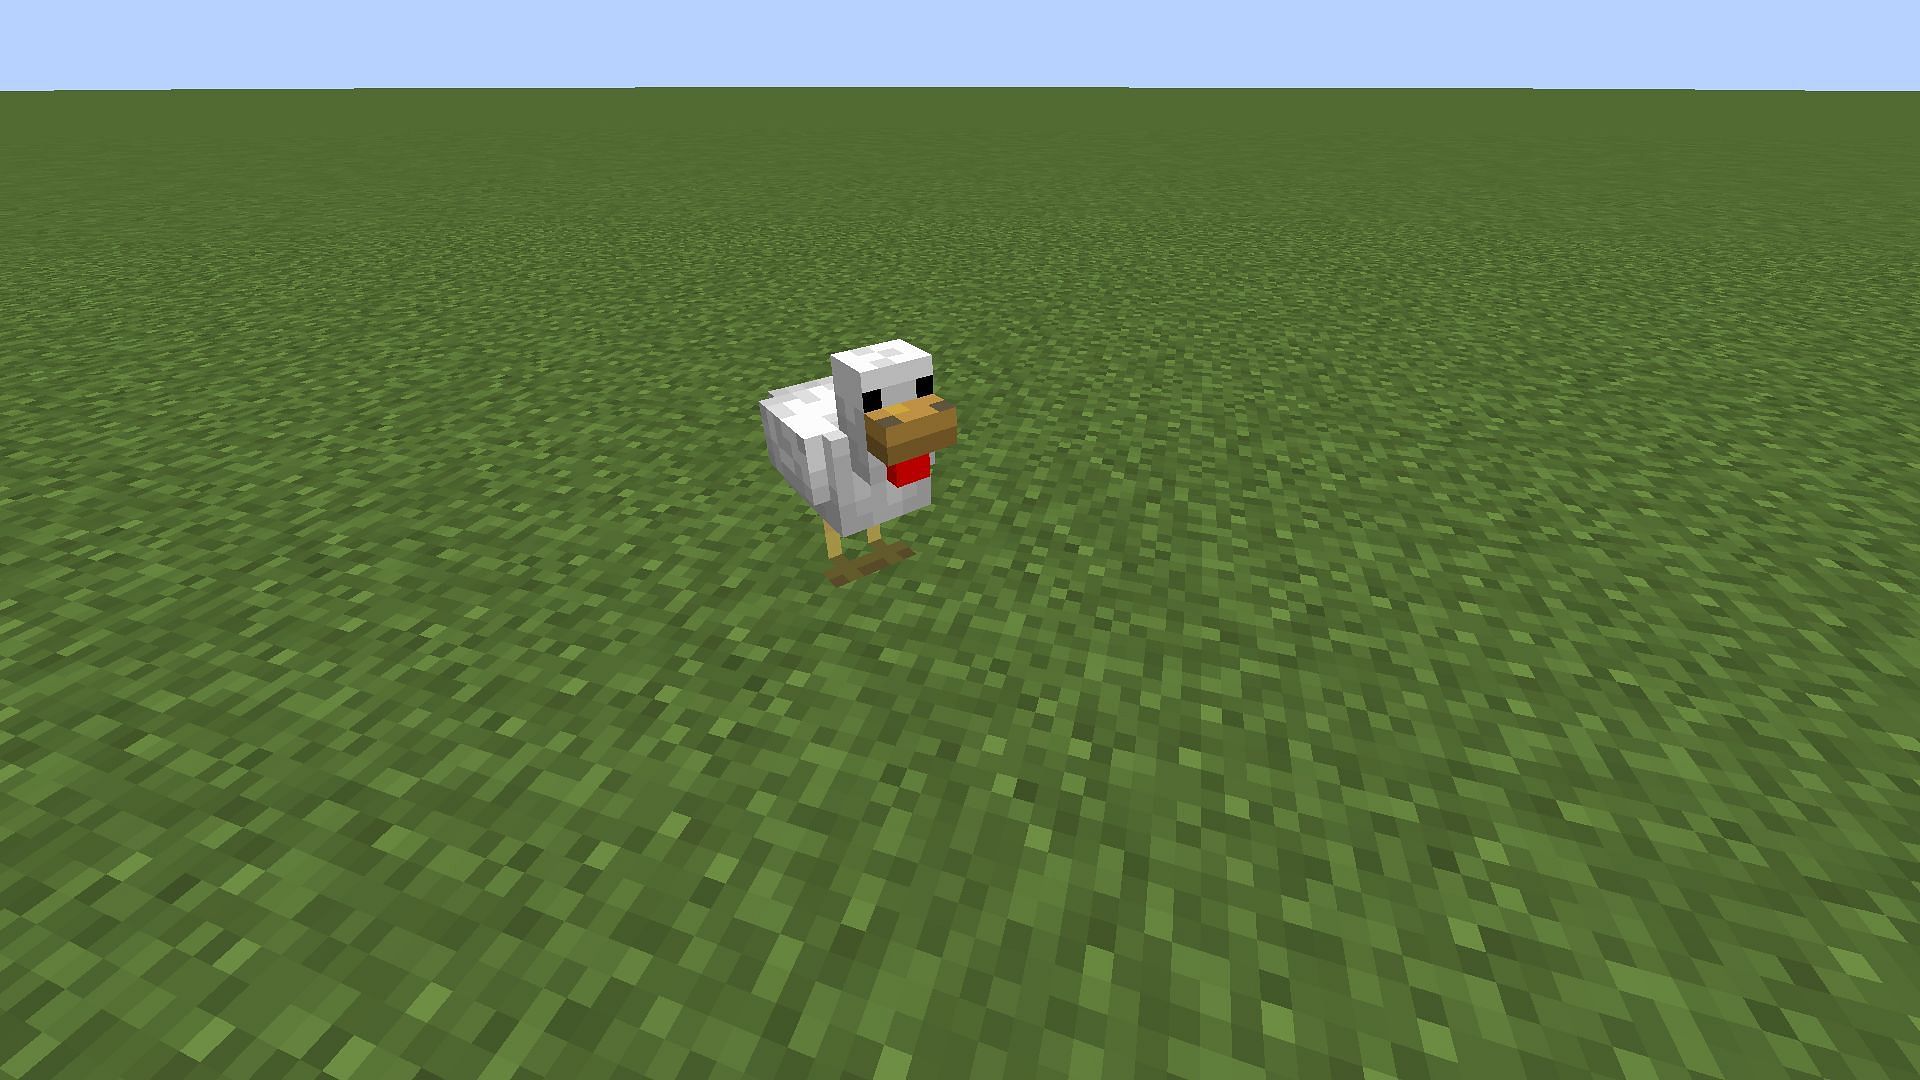 Chickens only have 2 hearts of health in the game (Image via Minecraft)